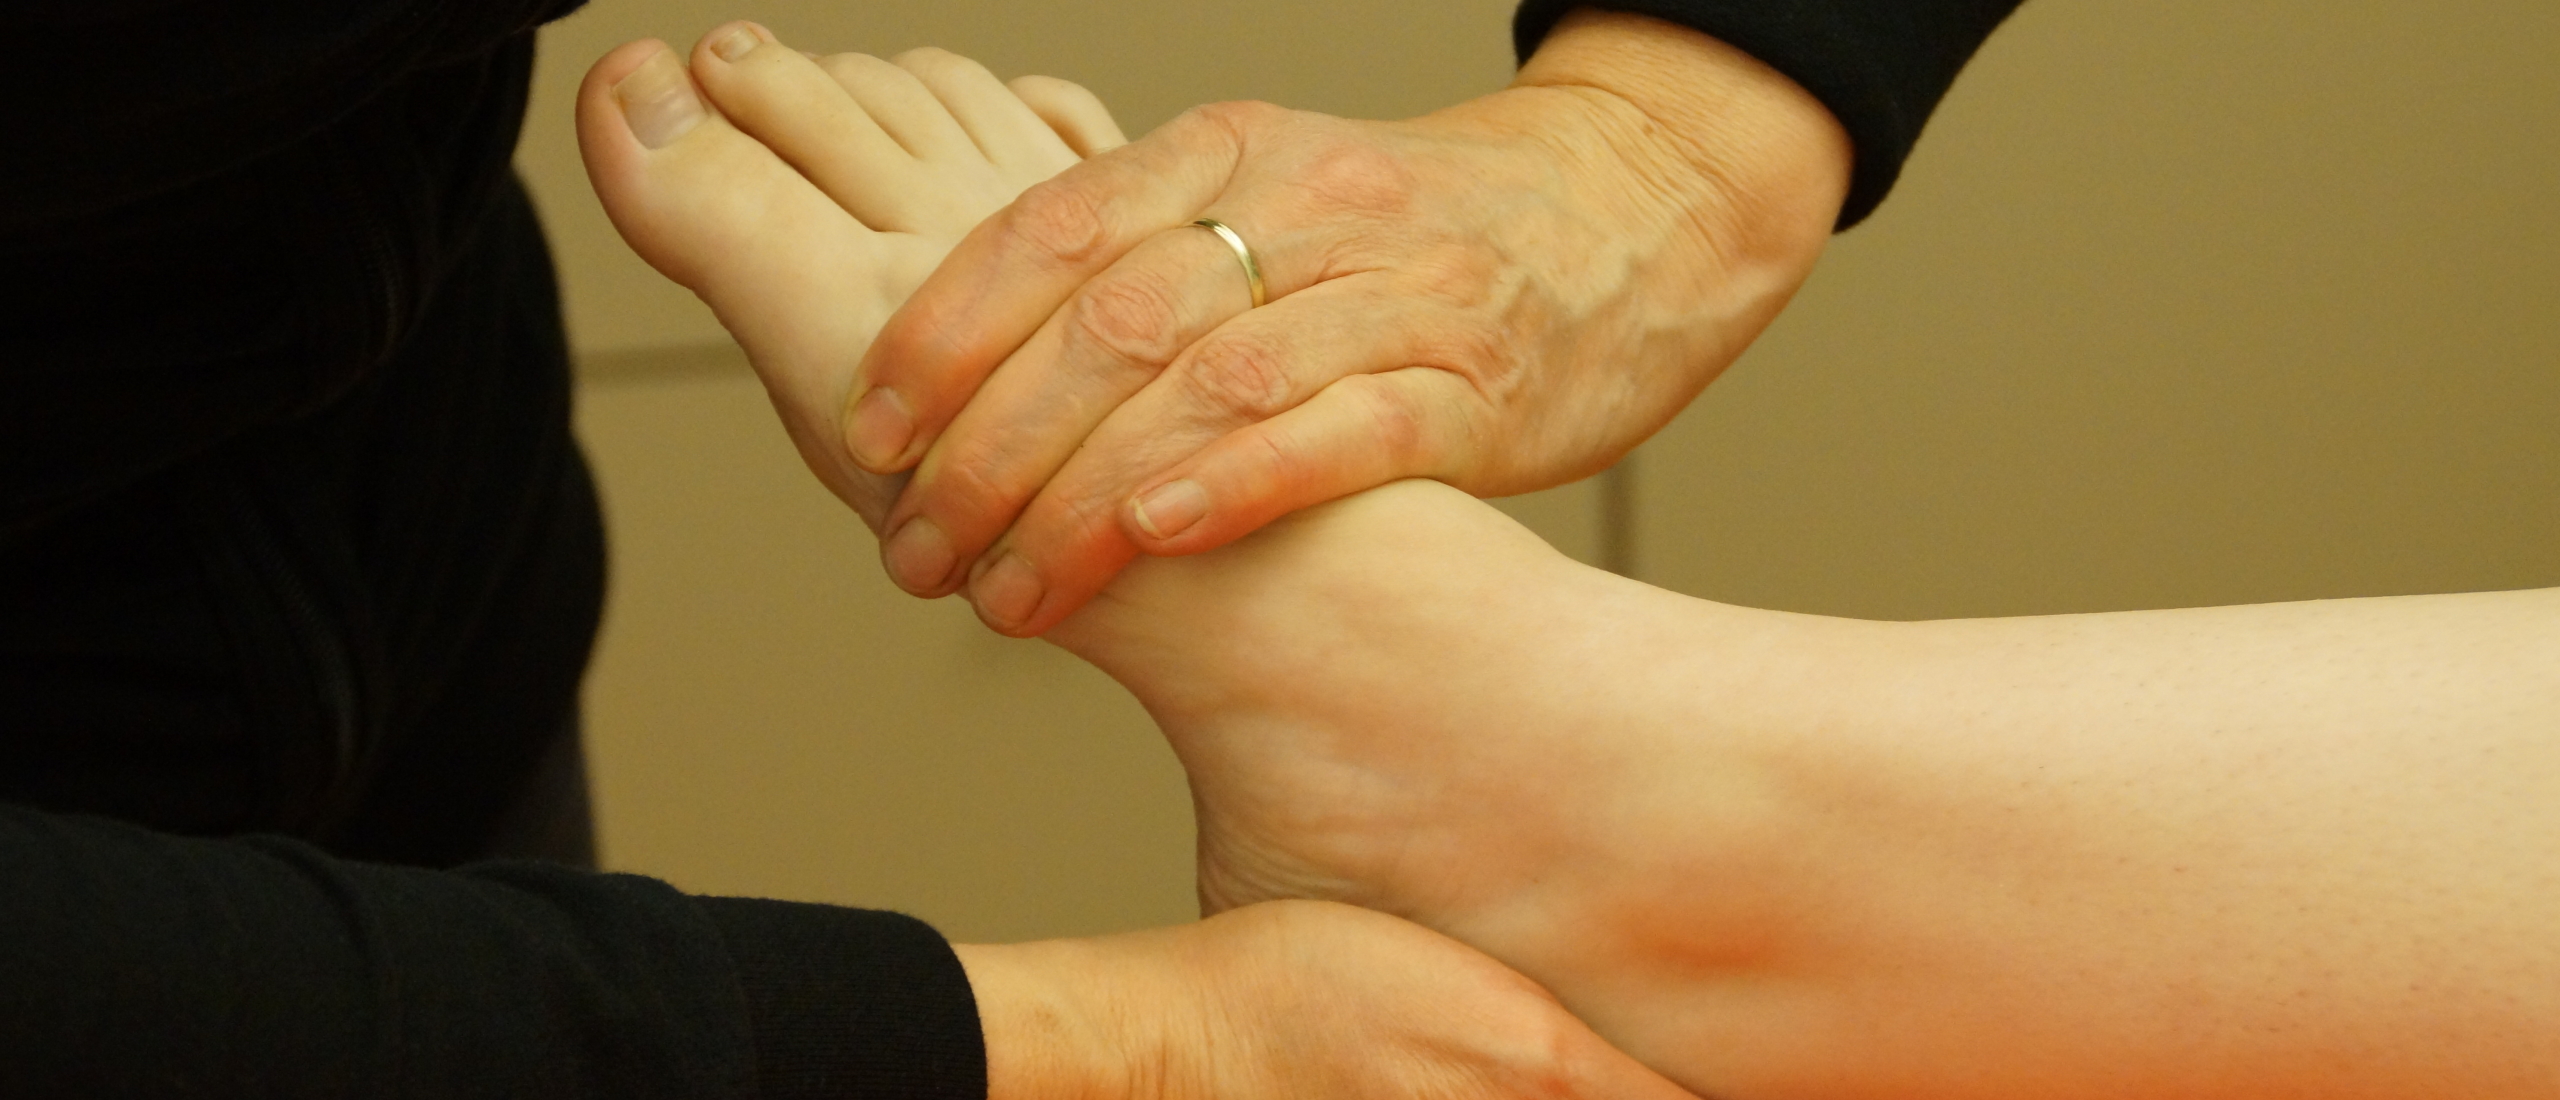 functional examination of the foot